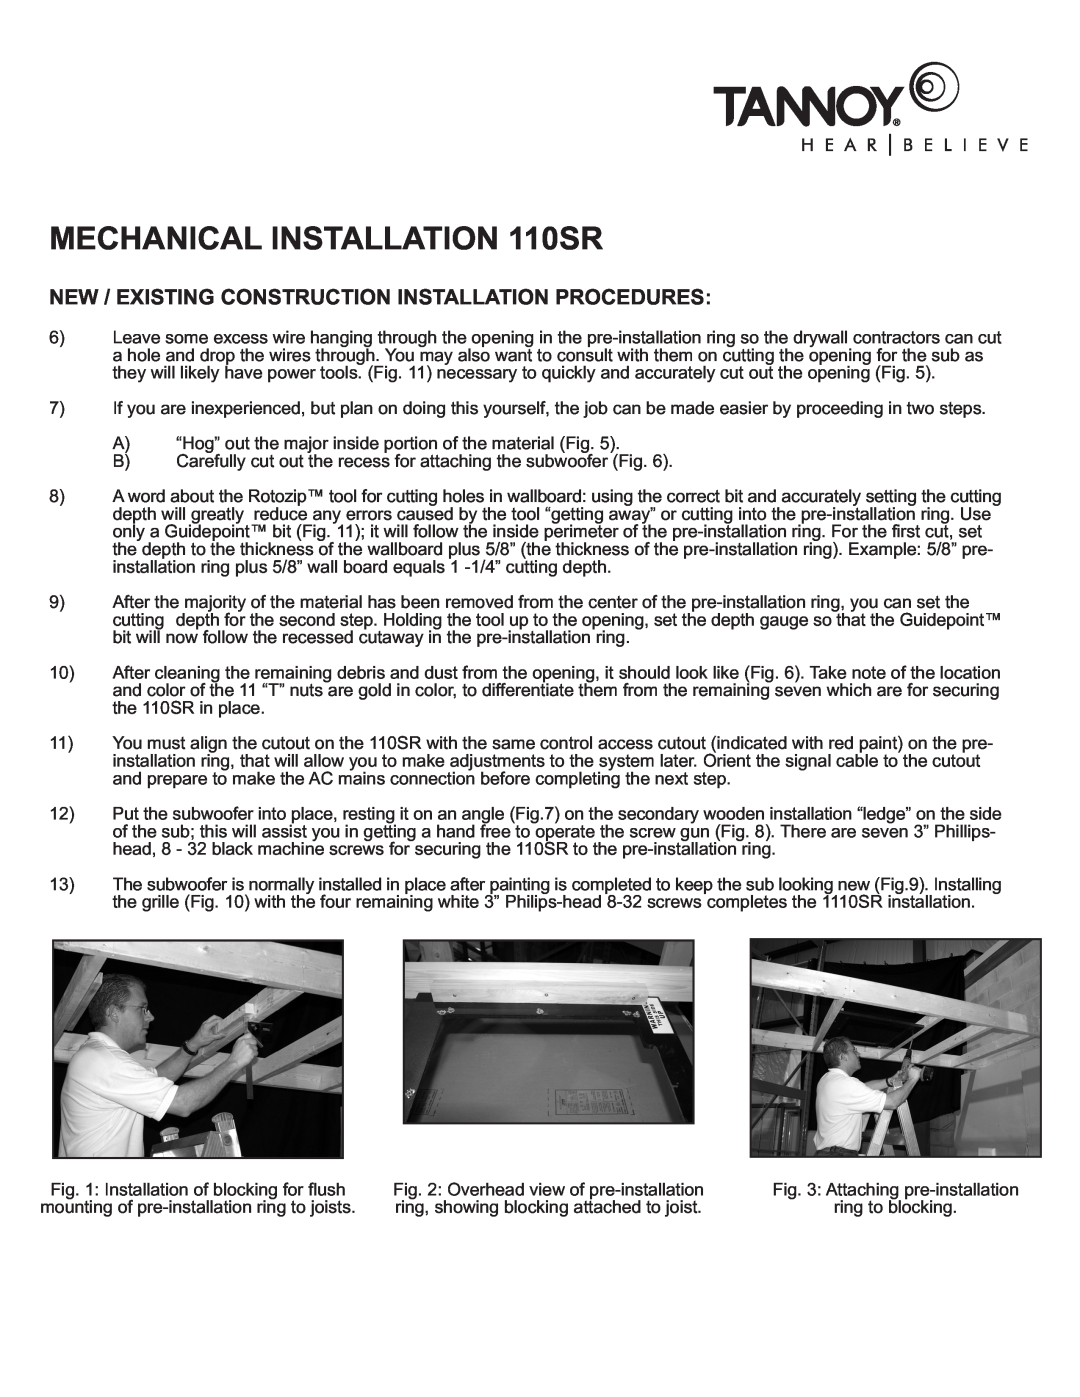 TOA Electronics owner manual MECHANICAL INSTALLATION 110SR, Overhead view of pre-installation 